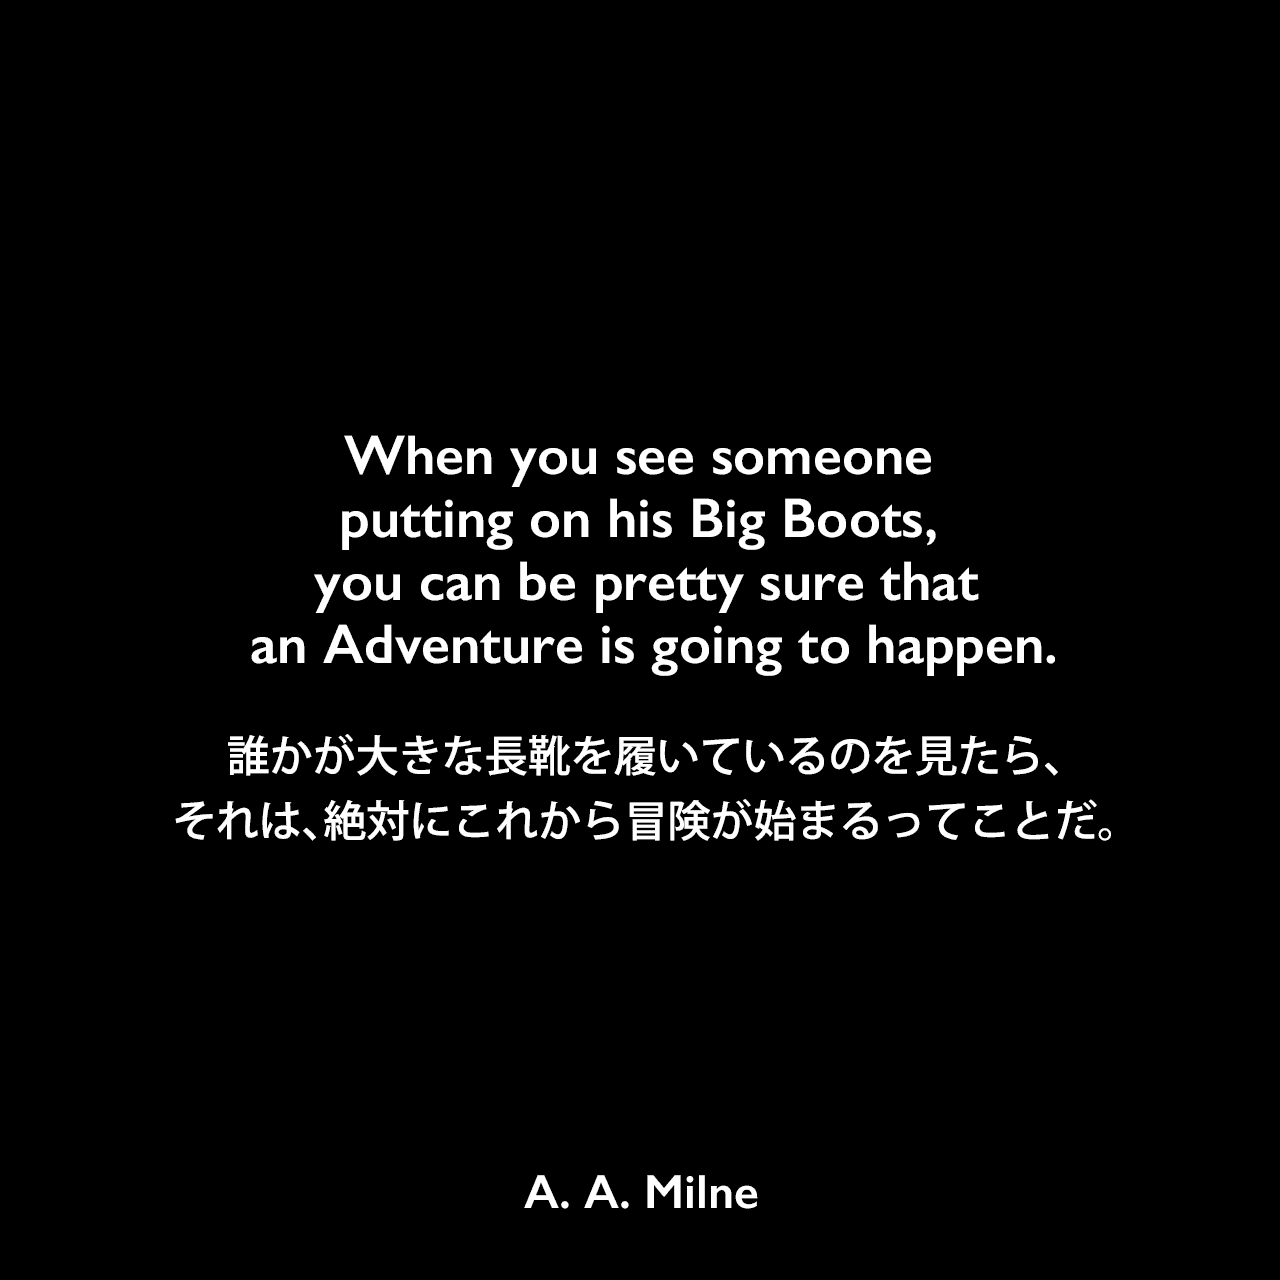 When you see someone putting on his Big Boots, you can be pretty sure that an Adventure is going to happen.誰かが大きな長靴を履いているのを見たら、それは、絶対にこれから冒険が始まるってことだ。A. A. Milne